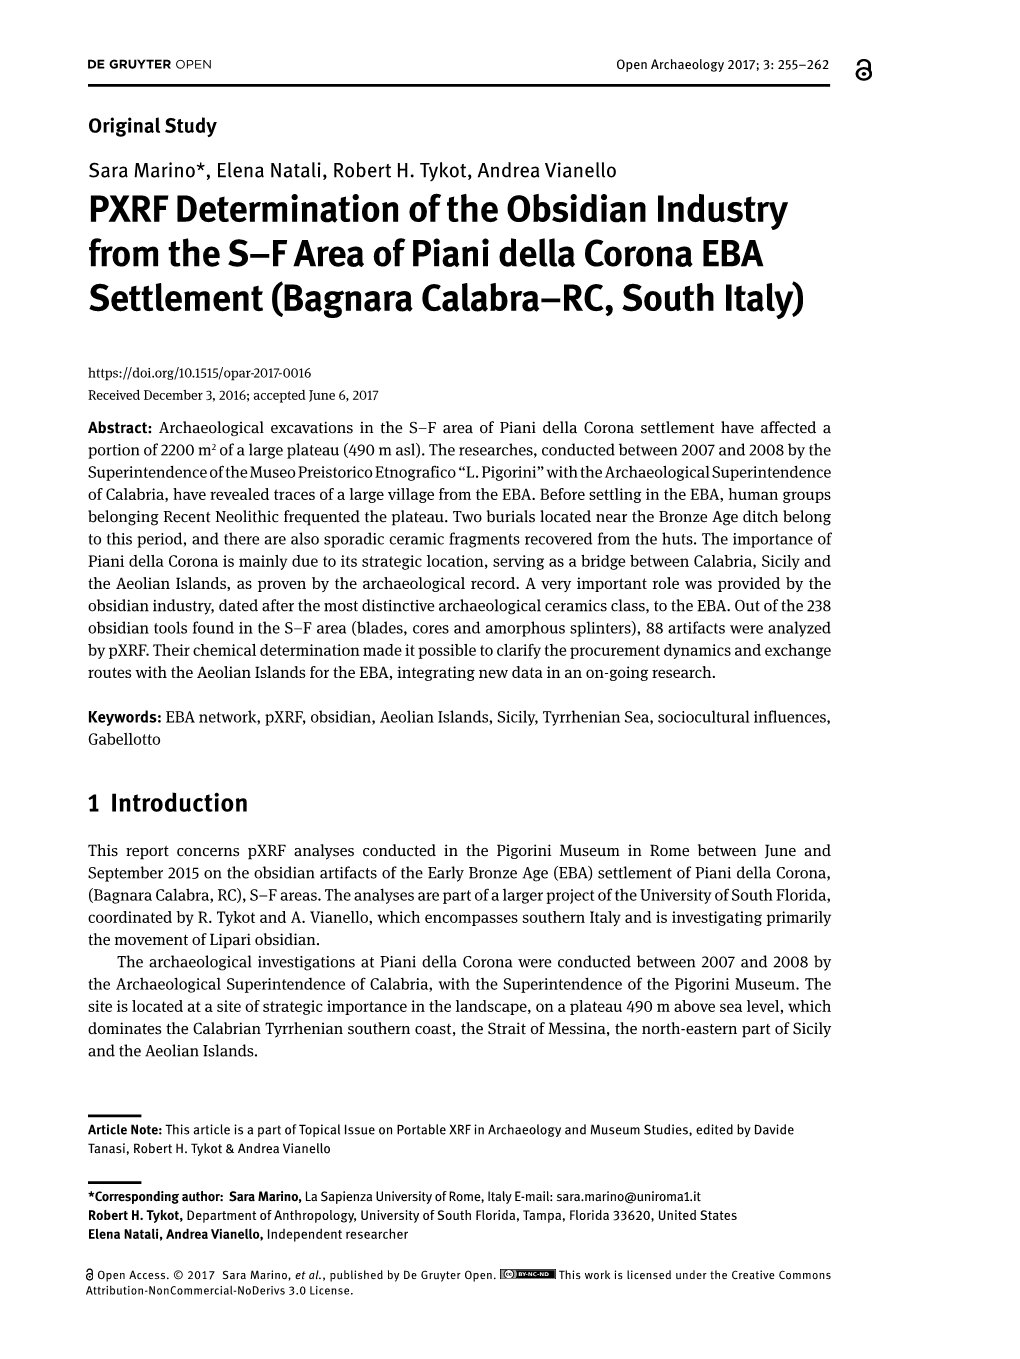 PXRF Determination of the Obsidian Industry from the S–F Area of Piani Della Corona EBA Settlement (Bagnara Calabra–RC, South Italy)